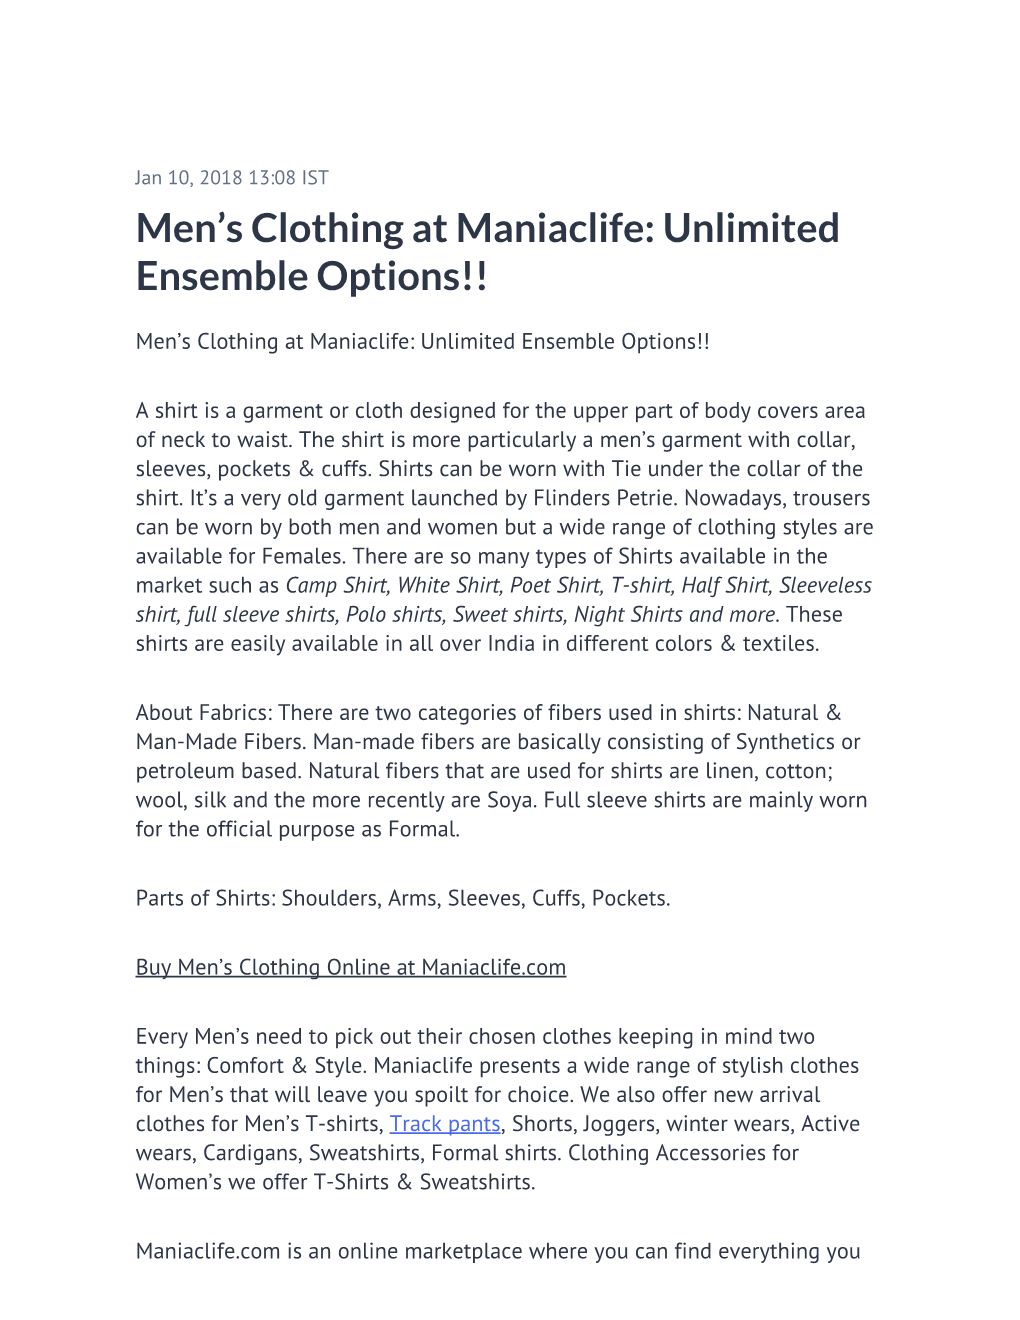 Men's Clothing at Maniaclife: Unlimited Ensemble